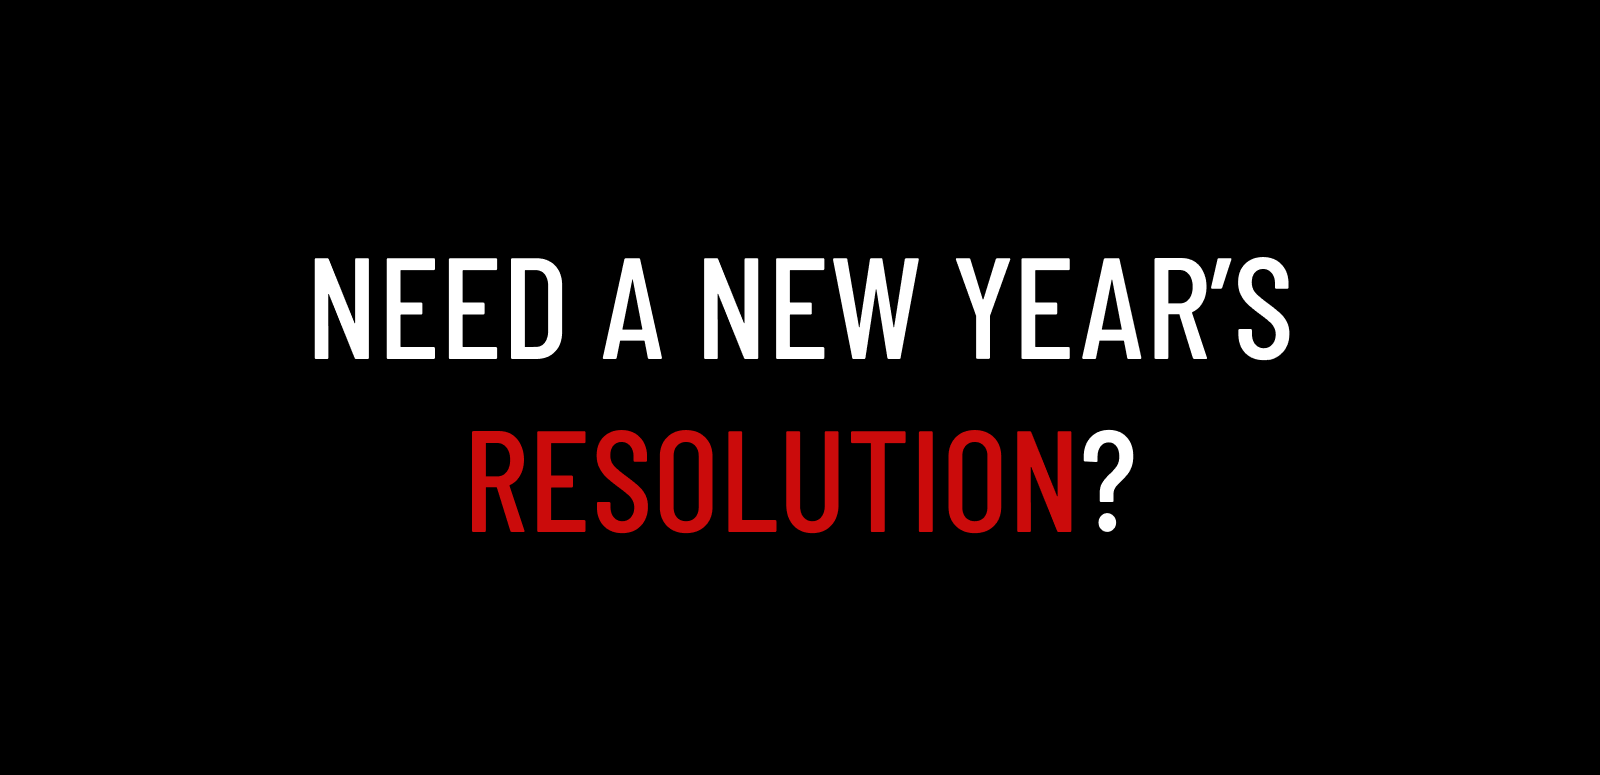 Need a New Year's resolution?